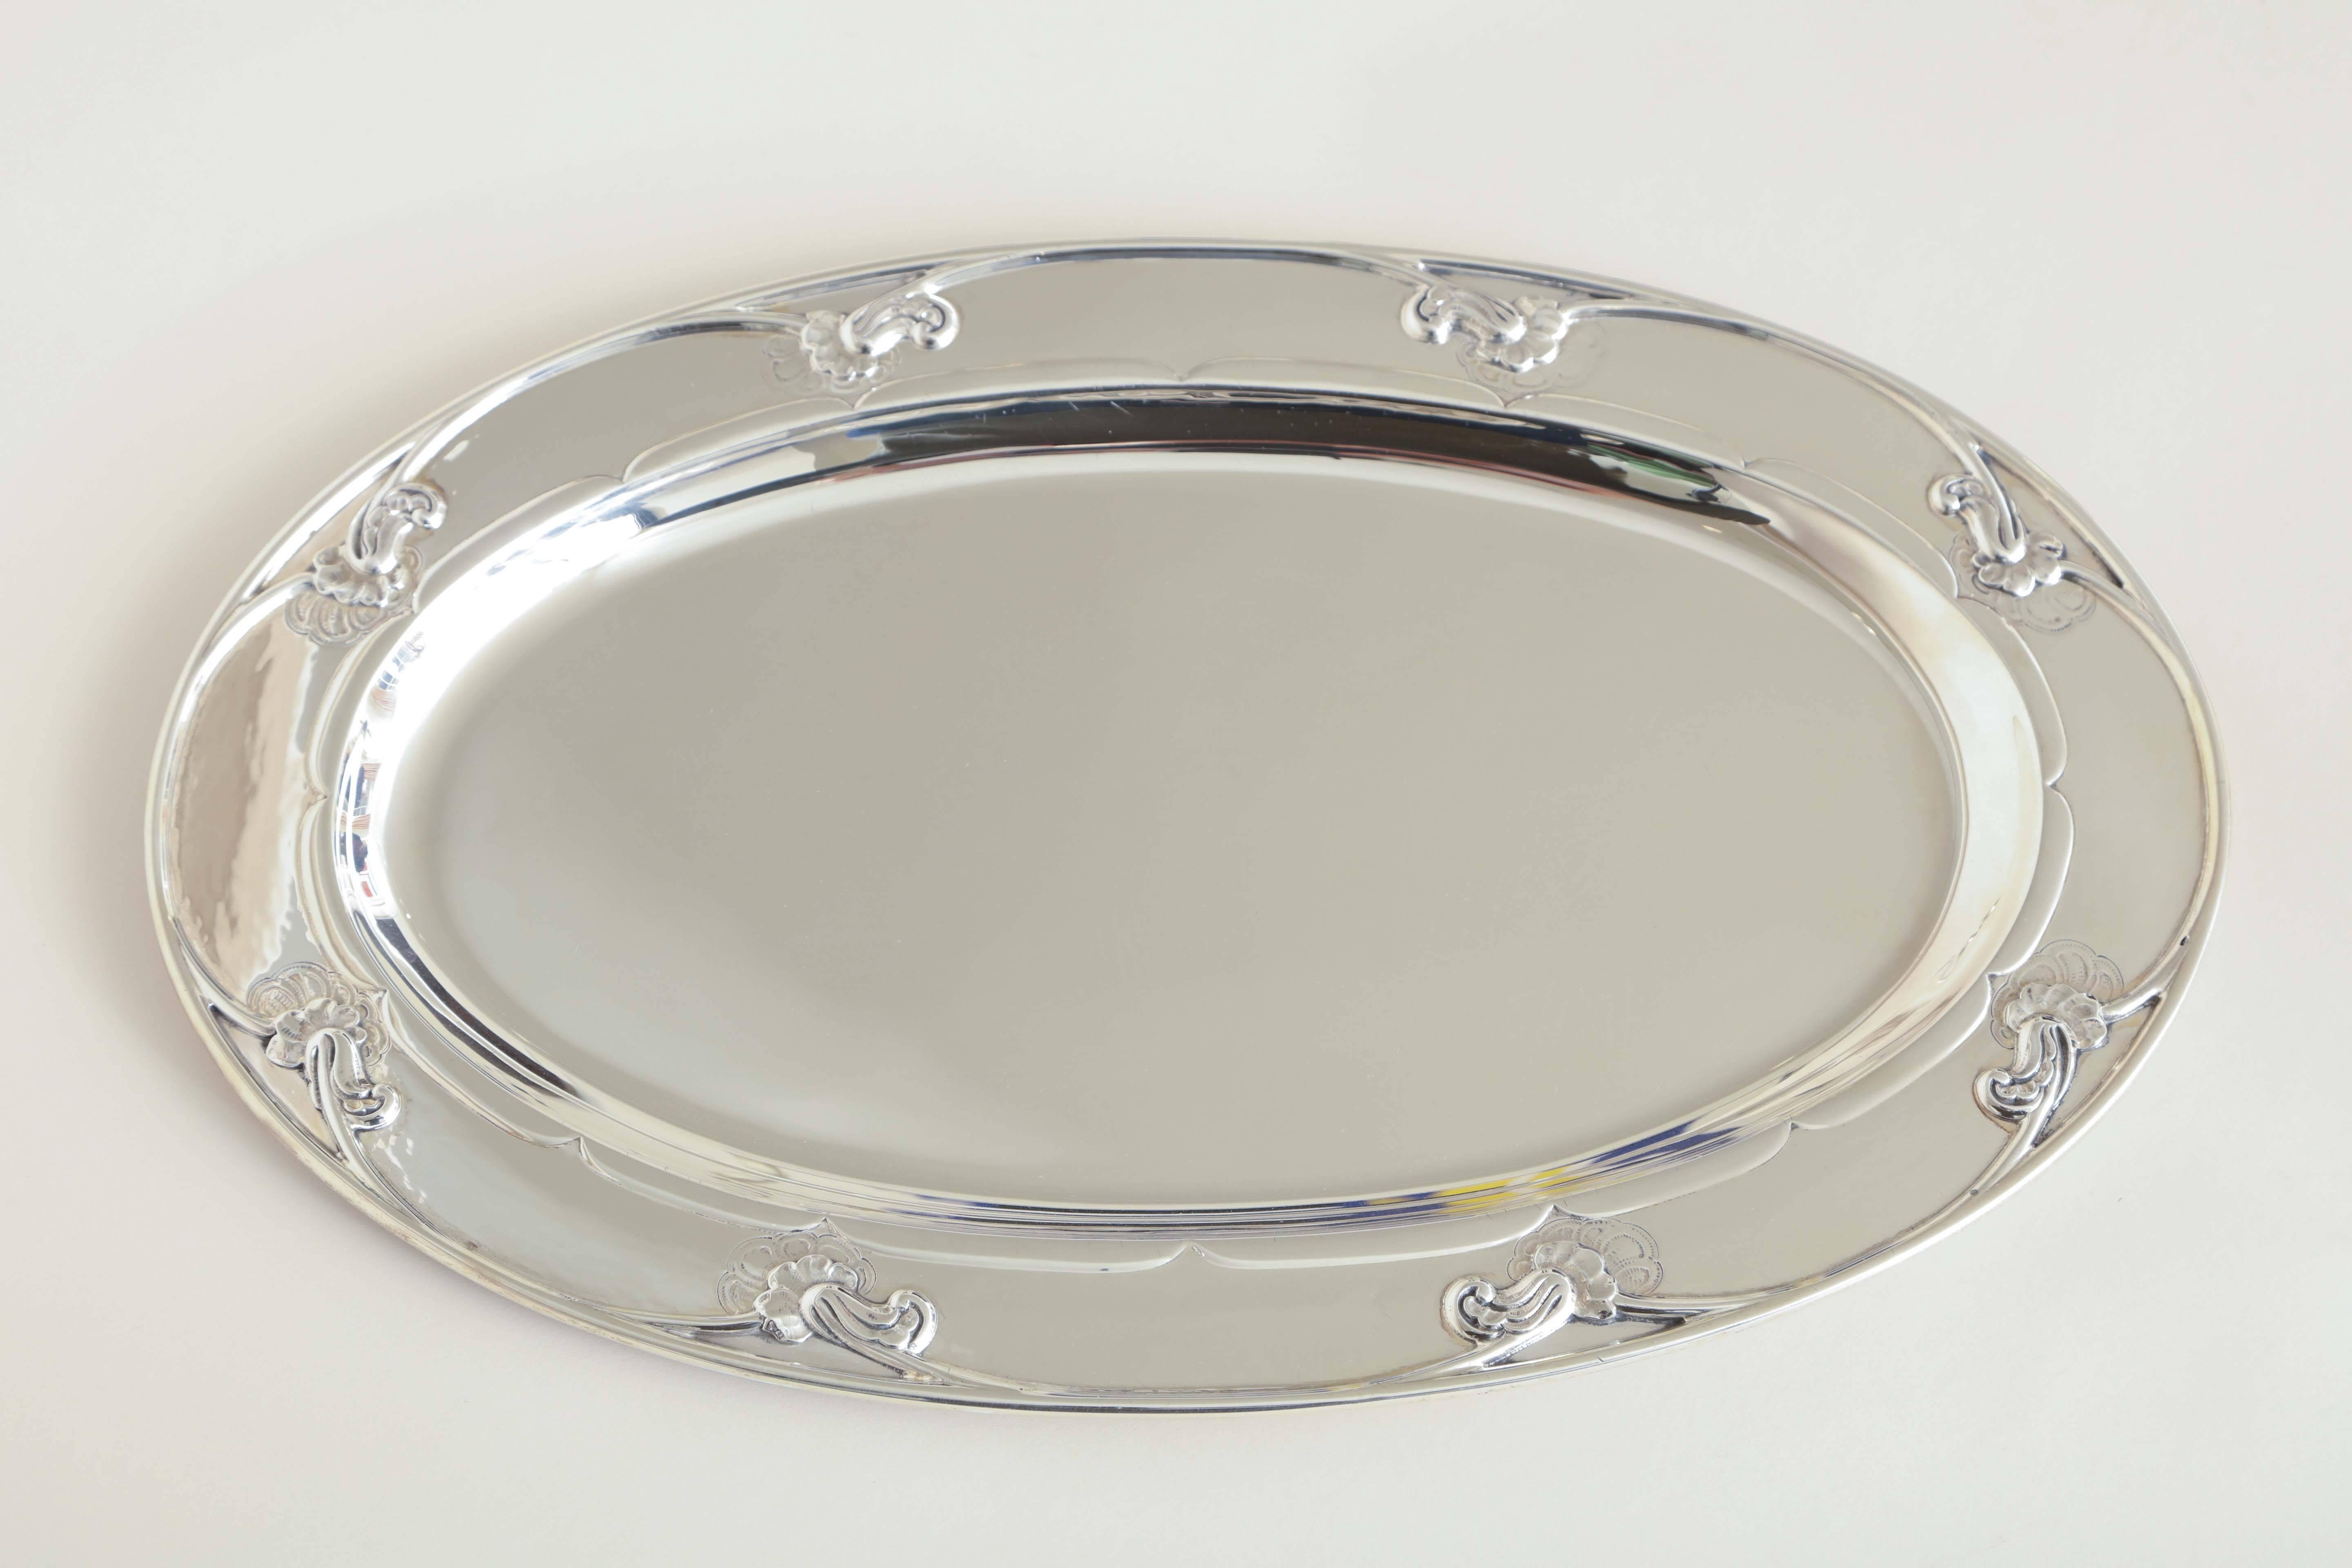 Oval tray with stylized blossom border.
Impressed with Georg Jensen mark for 1945-present/ STERLING/ DENMARK/ 230 D.
29.60 ozs.

(Price shown is reduced price, no further trade discount) 